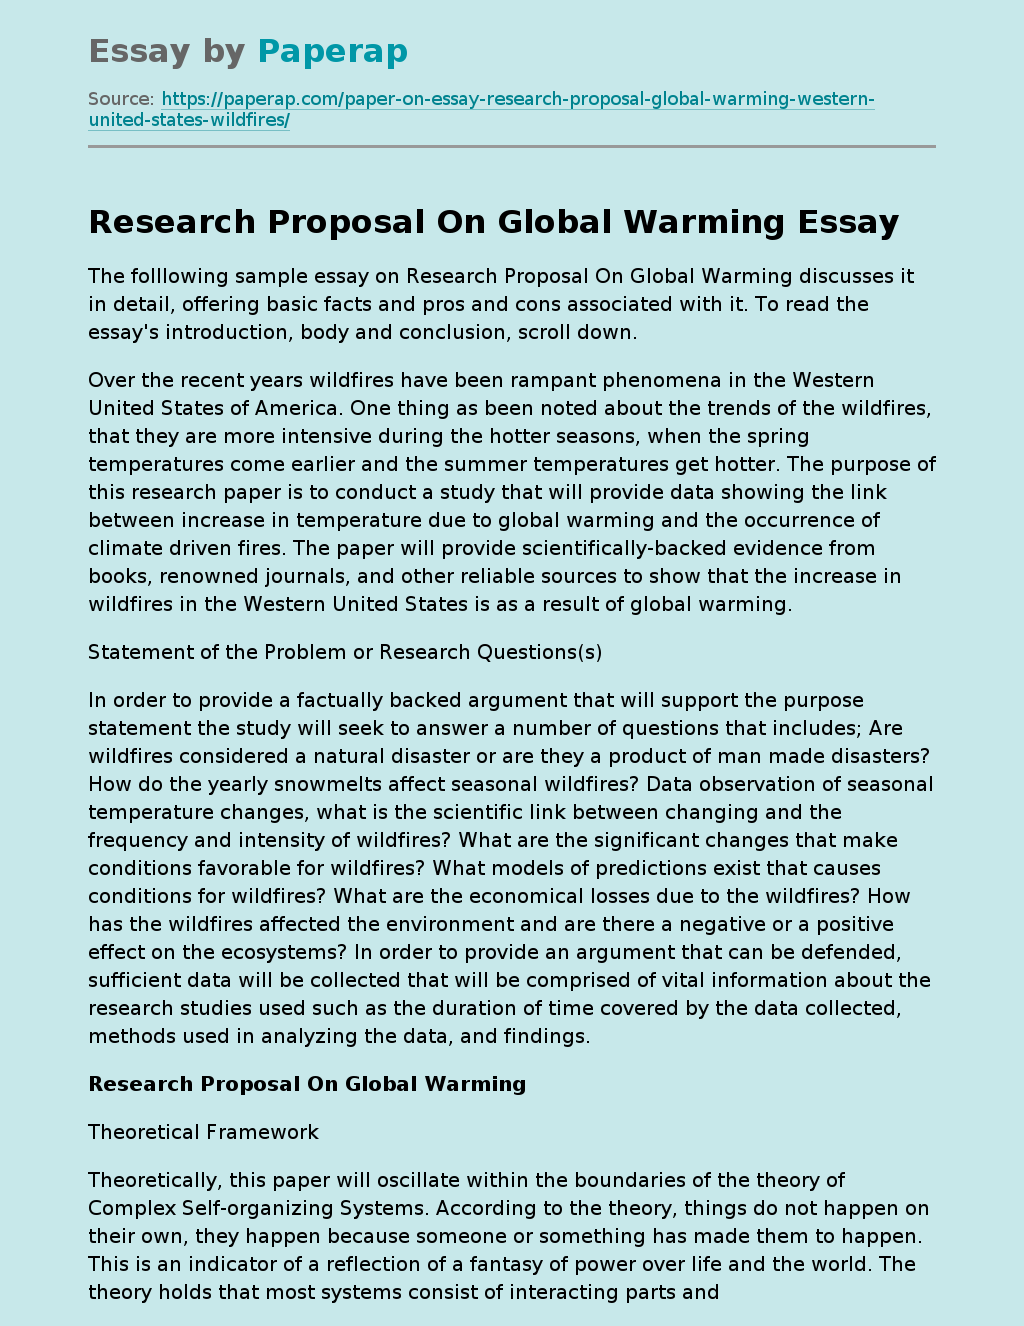 Research Proposal On Global Warming